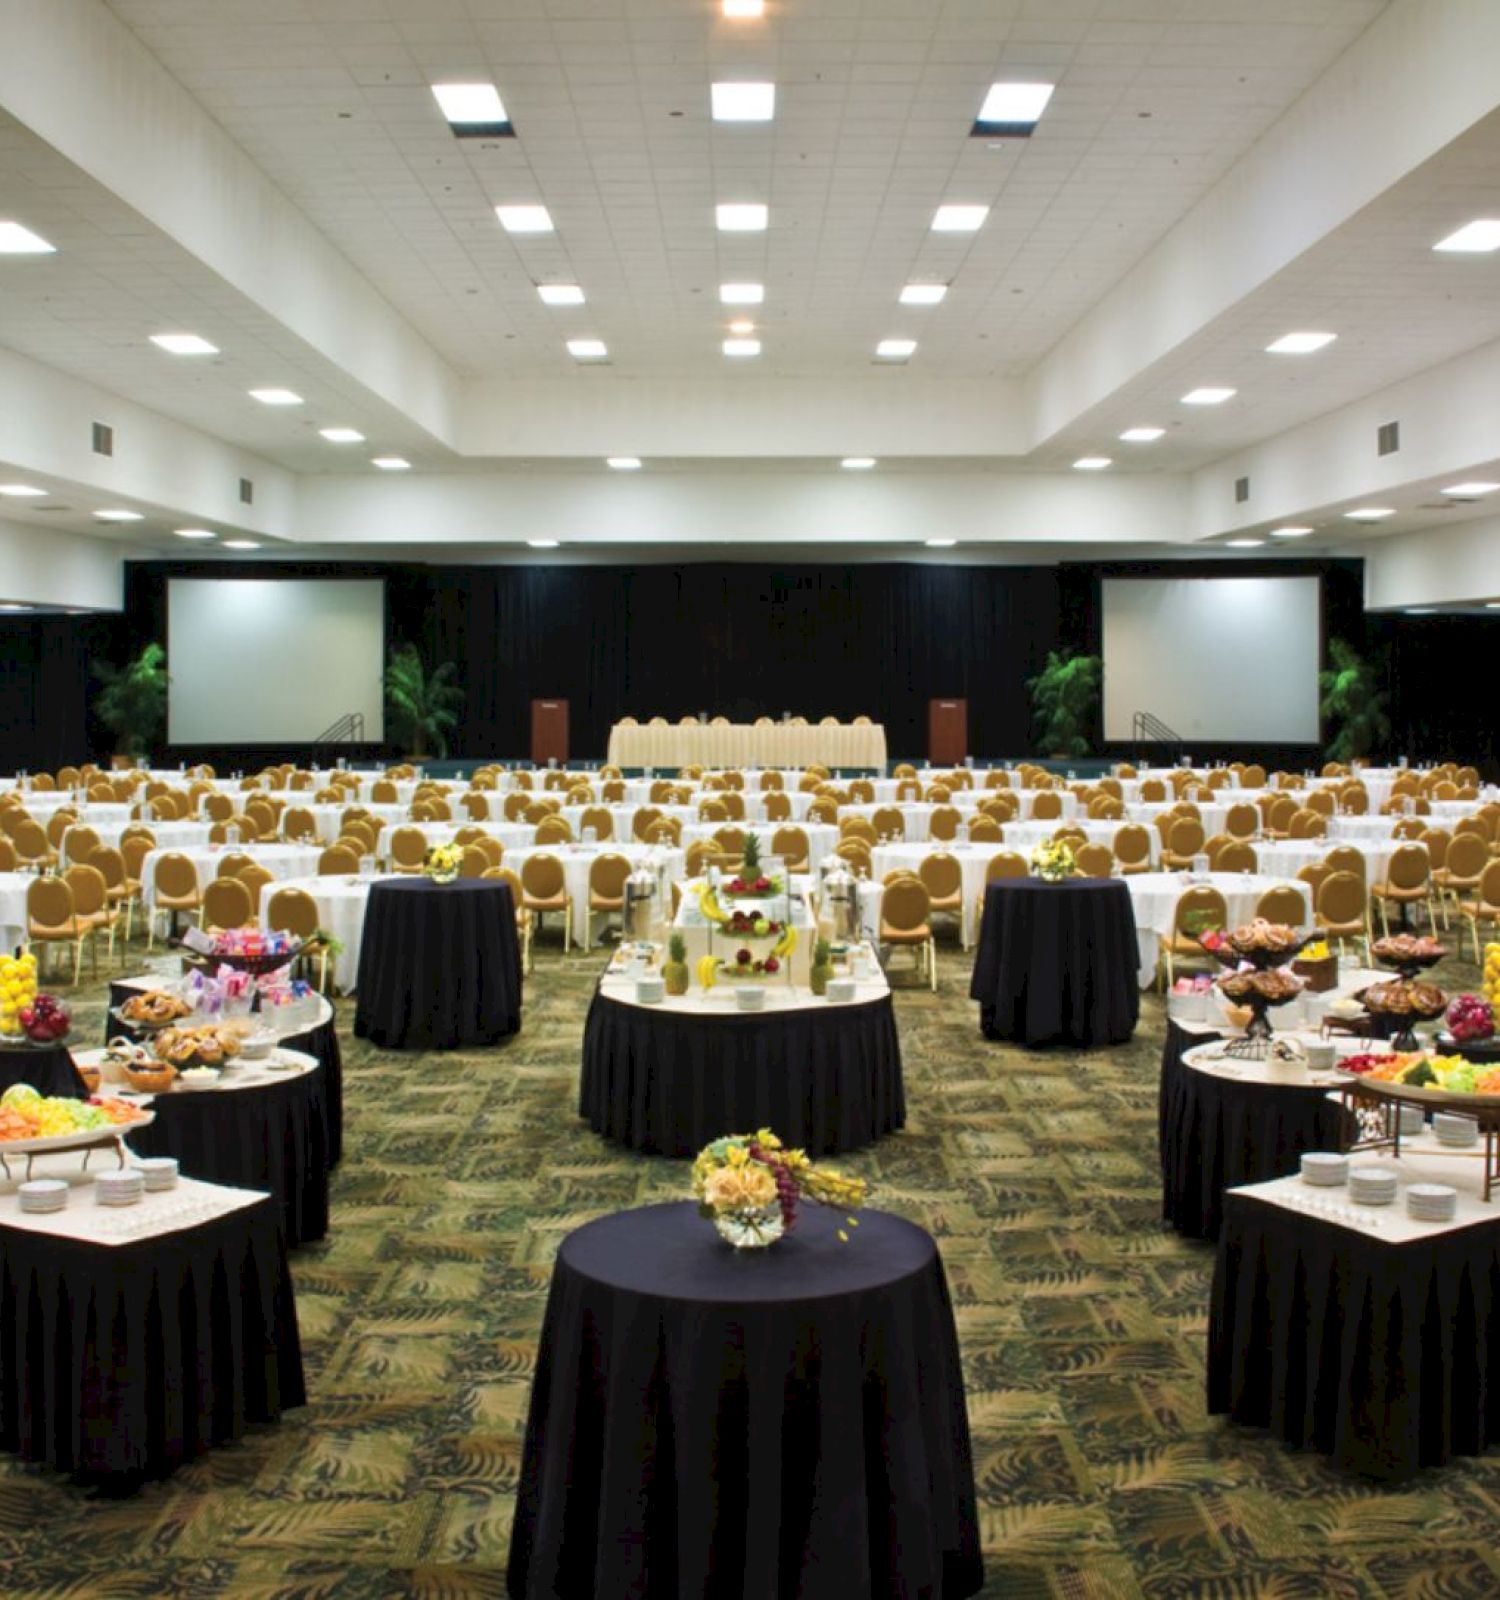 The image shows a large conference room set up with tables, chairs, and food stations, likely for a meeting or event.